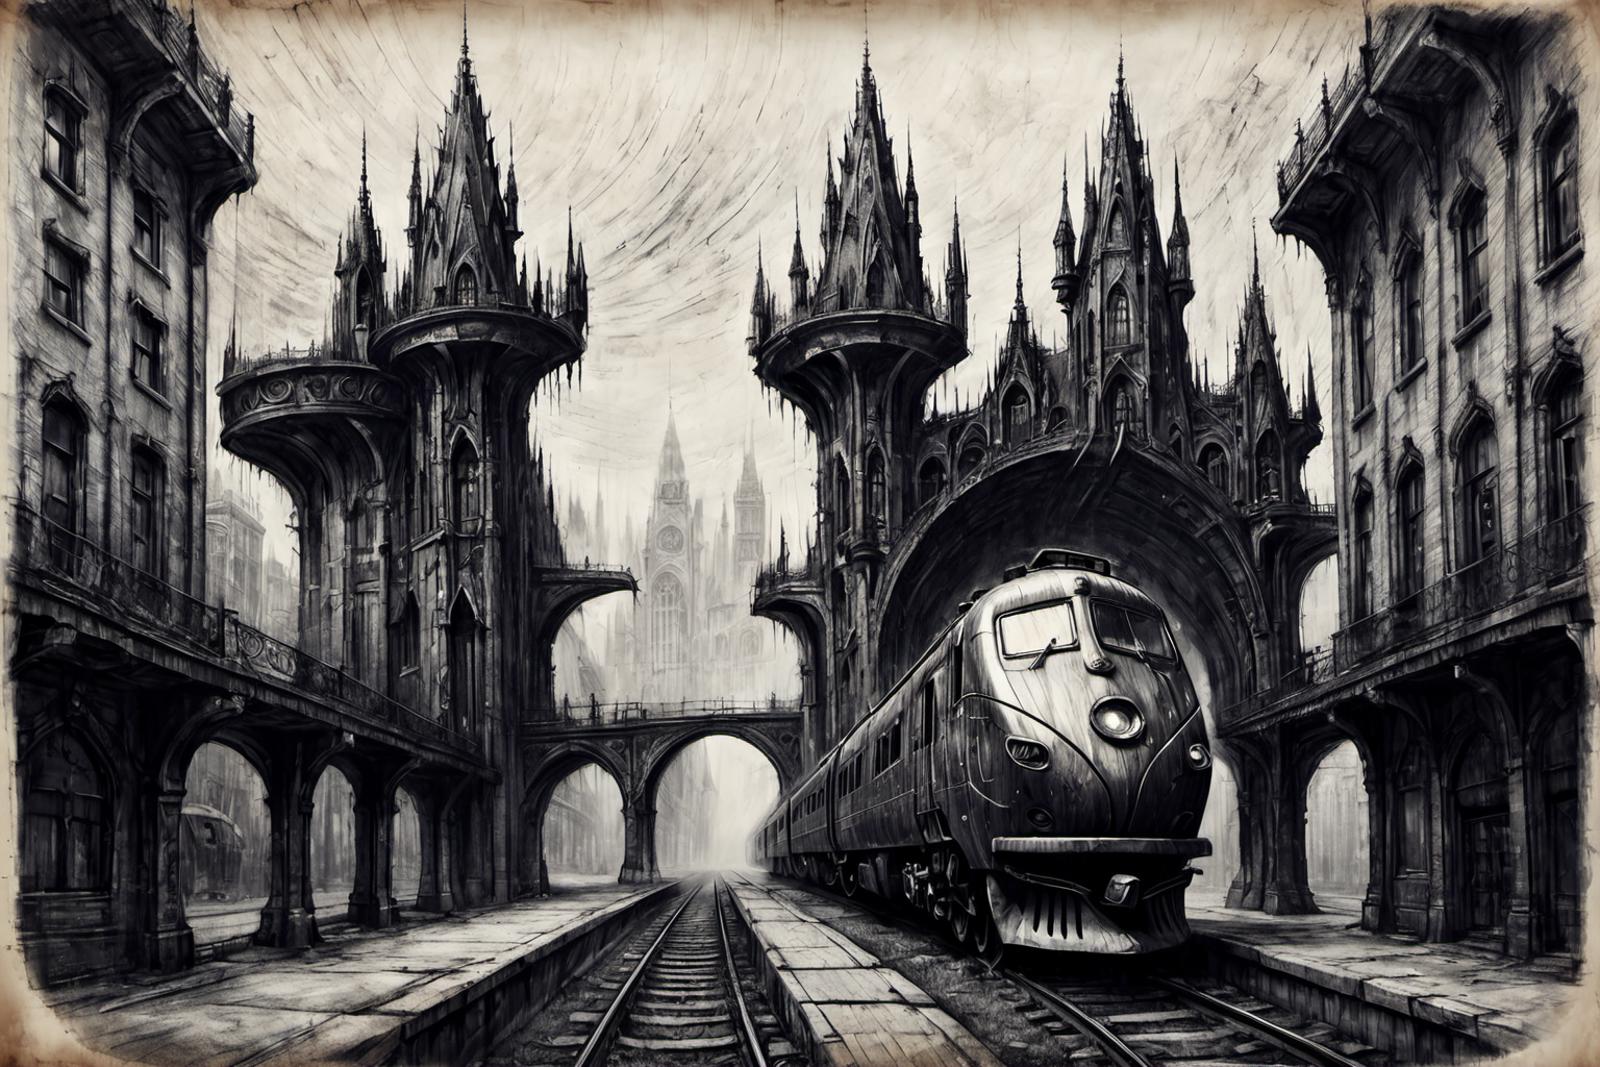 An artistic drawing of a train passing under a bridge, surrounded by a dark and mysterious atmosphere.